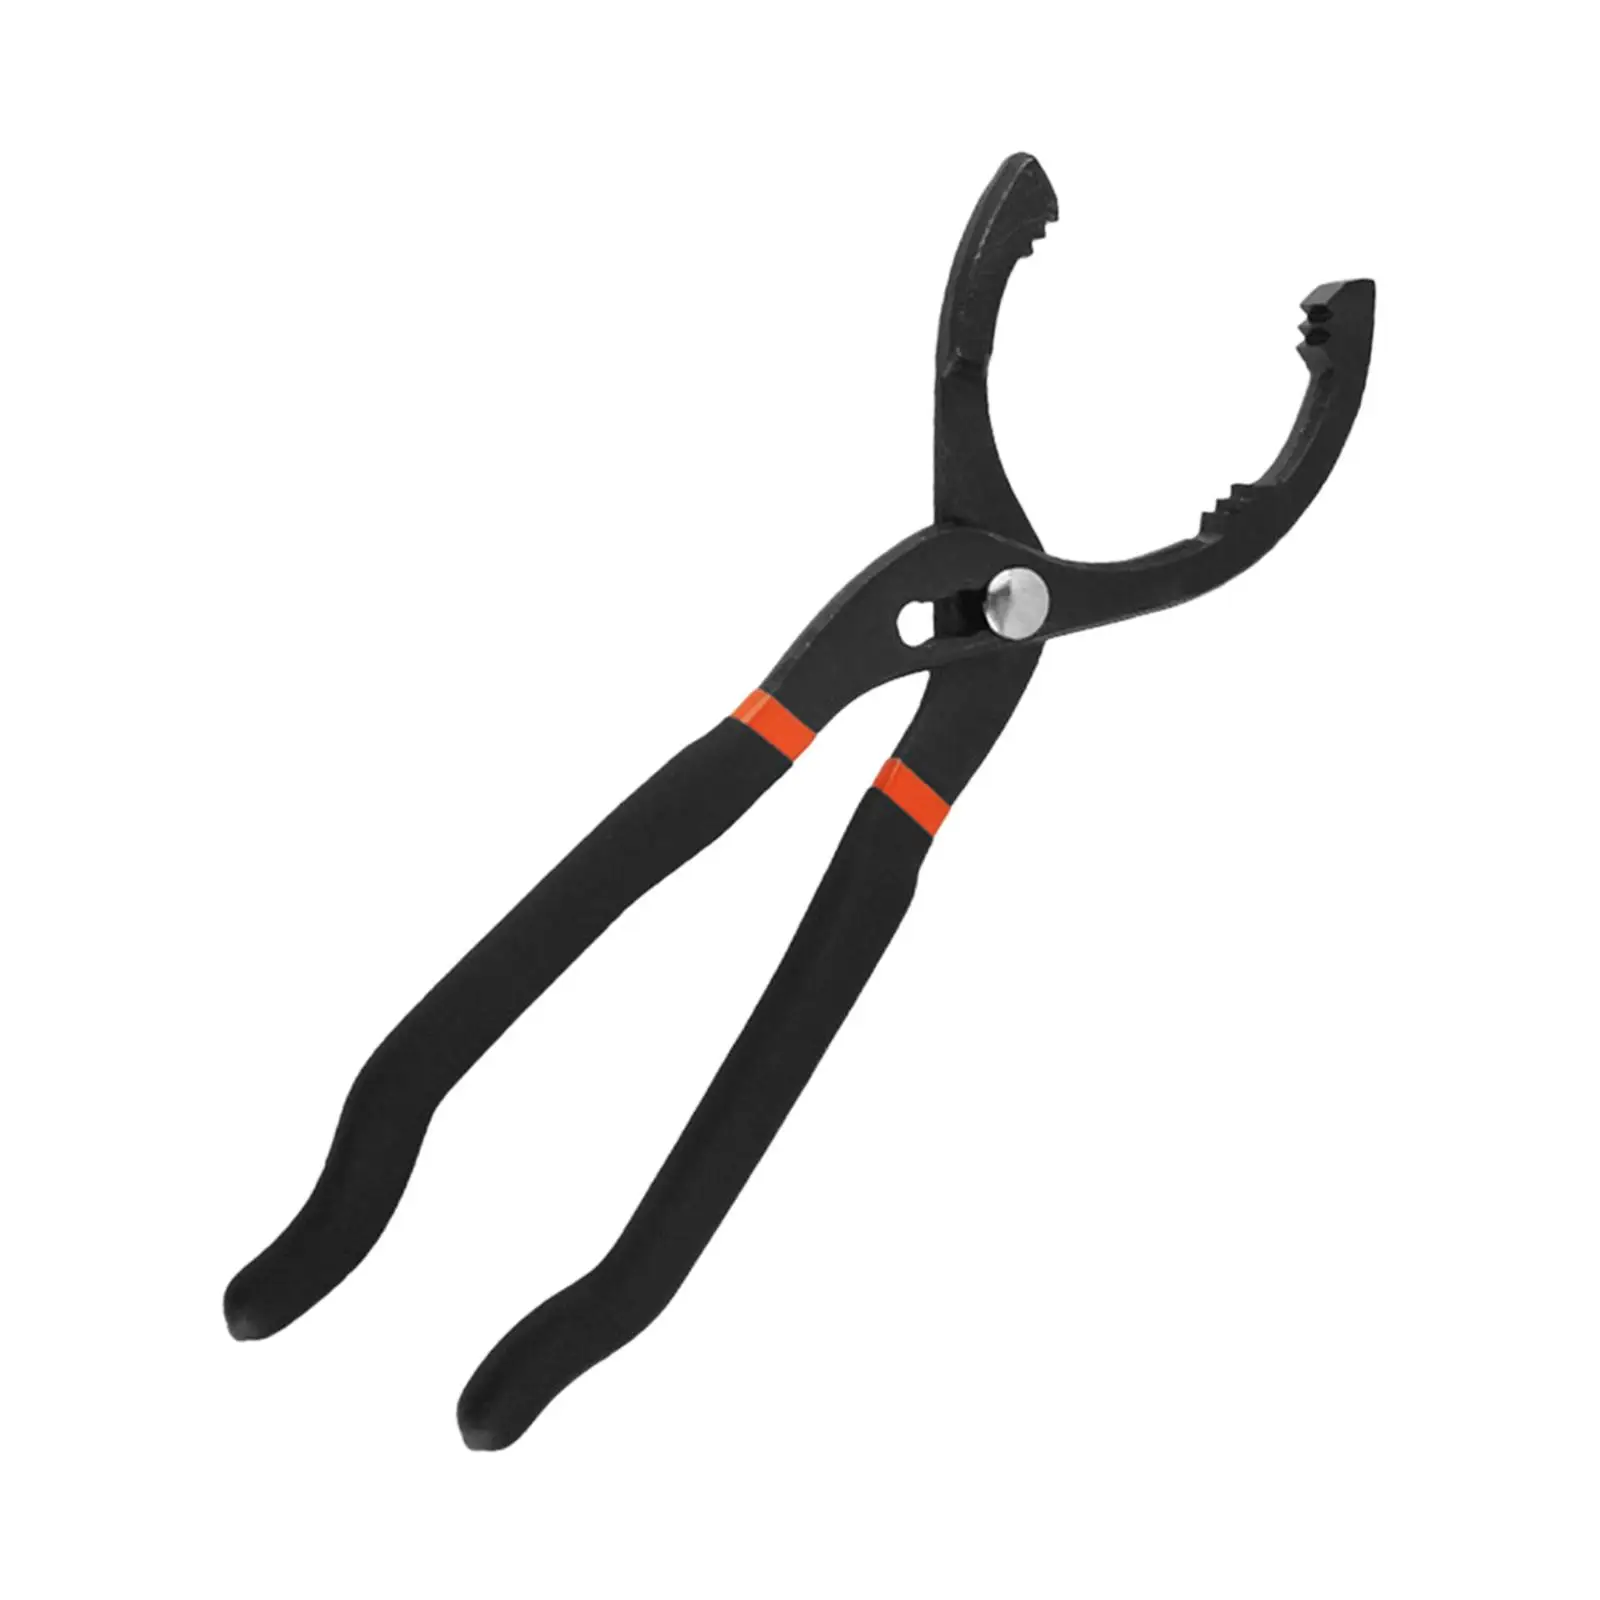 12 inch Filter Wrench Pliers Disassembly Tool Sturdy Universal Durable Useful Hand Removal Plier Adjustable Oil Filter Wrench